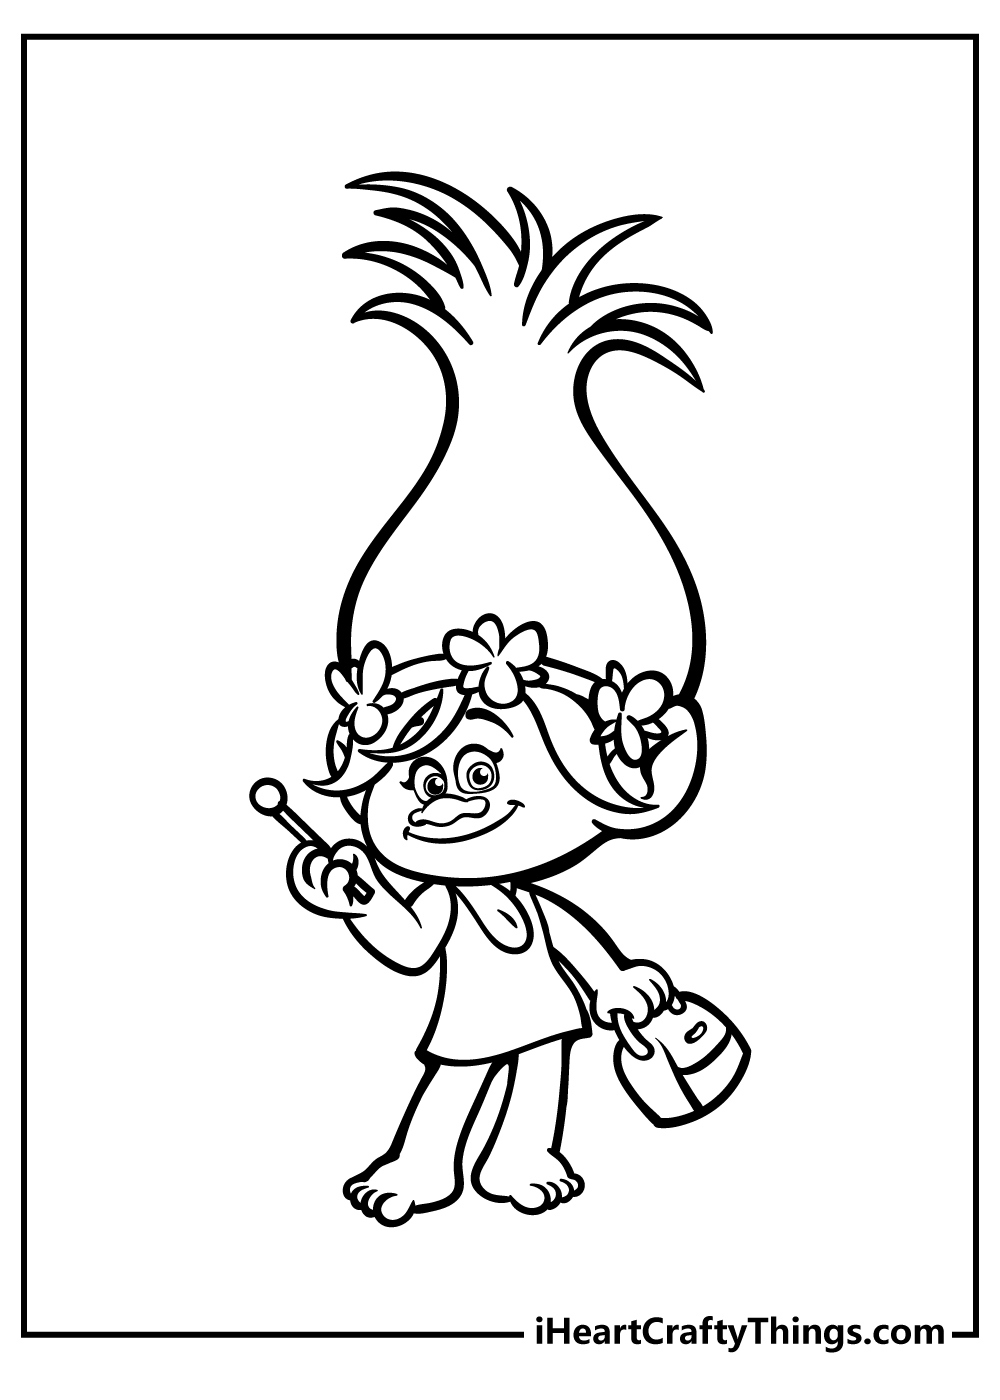 Troll coloring pages free printable